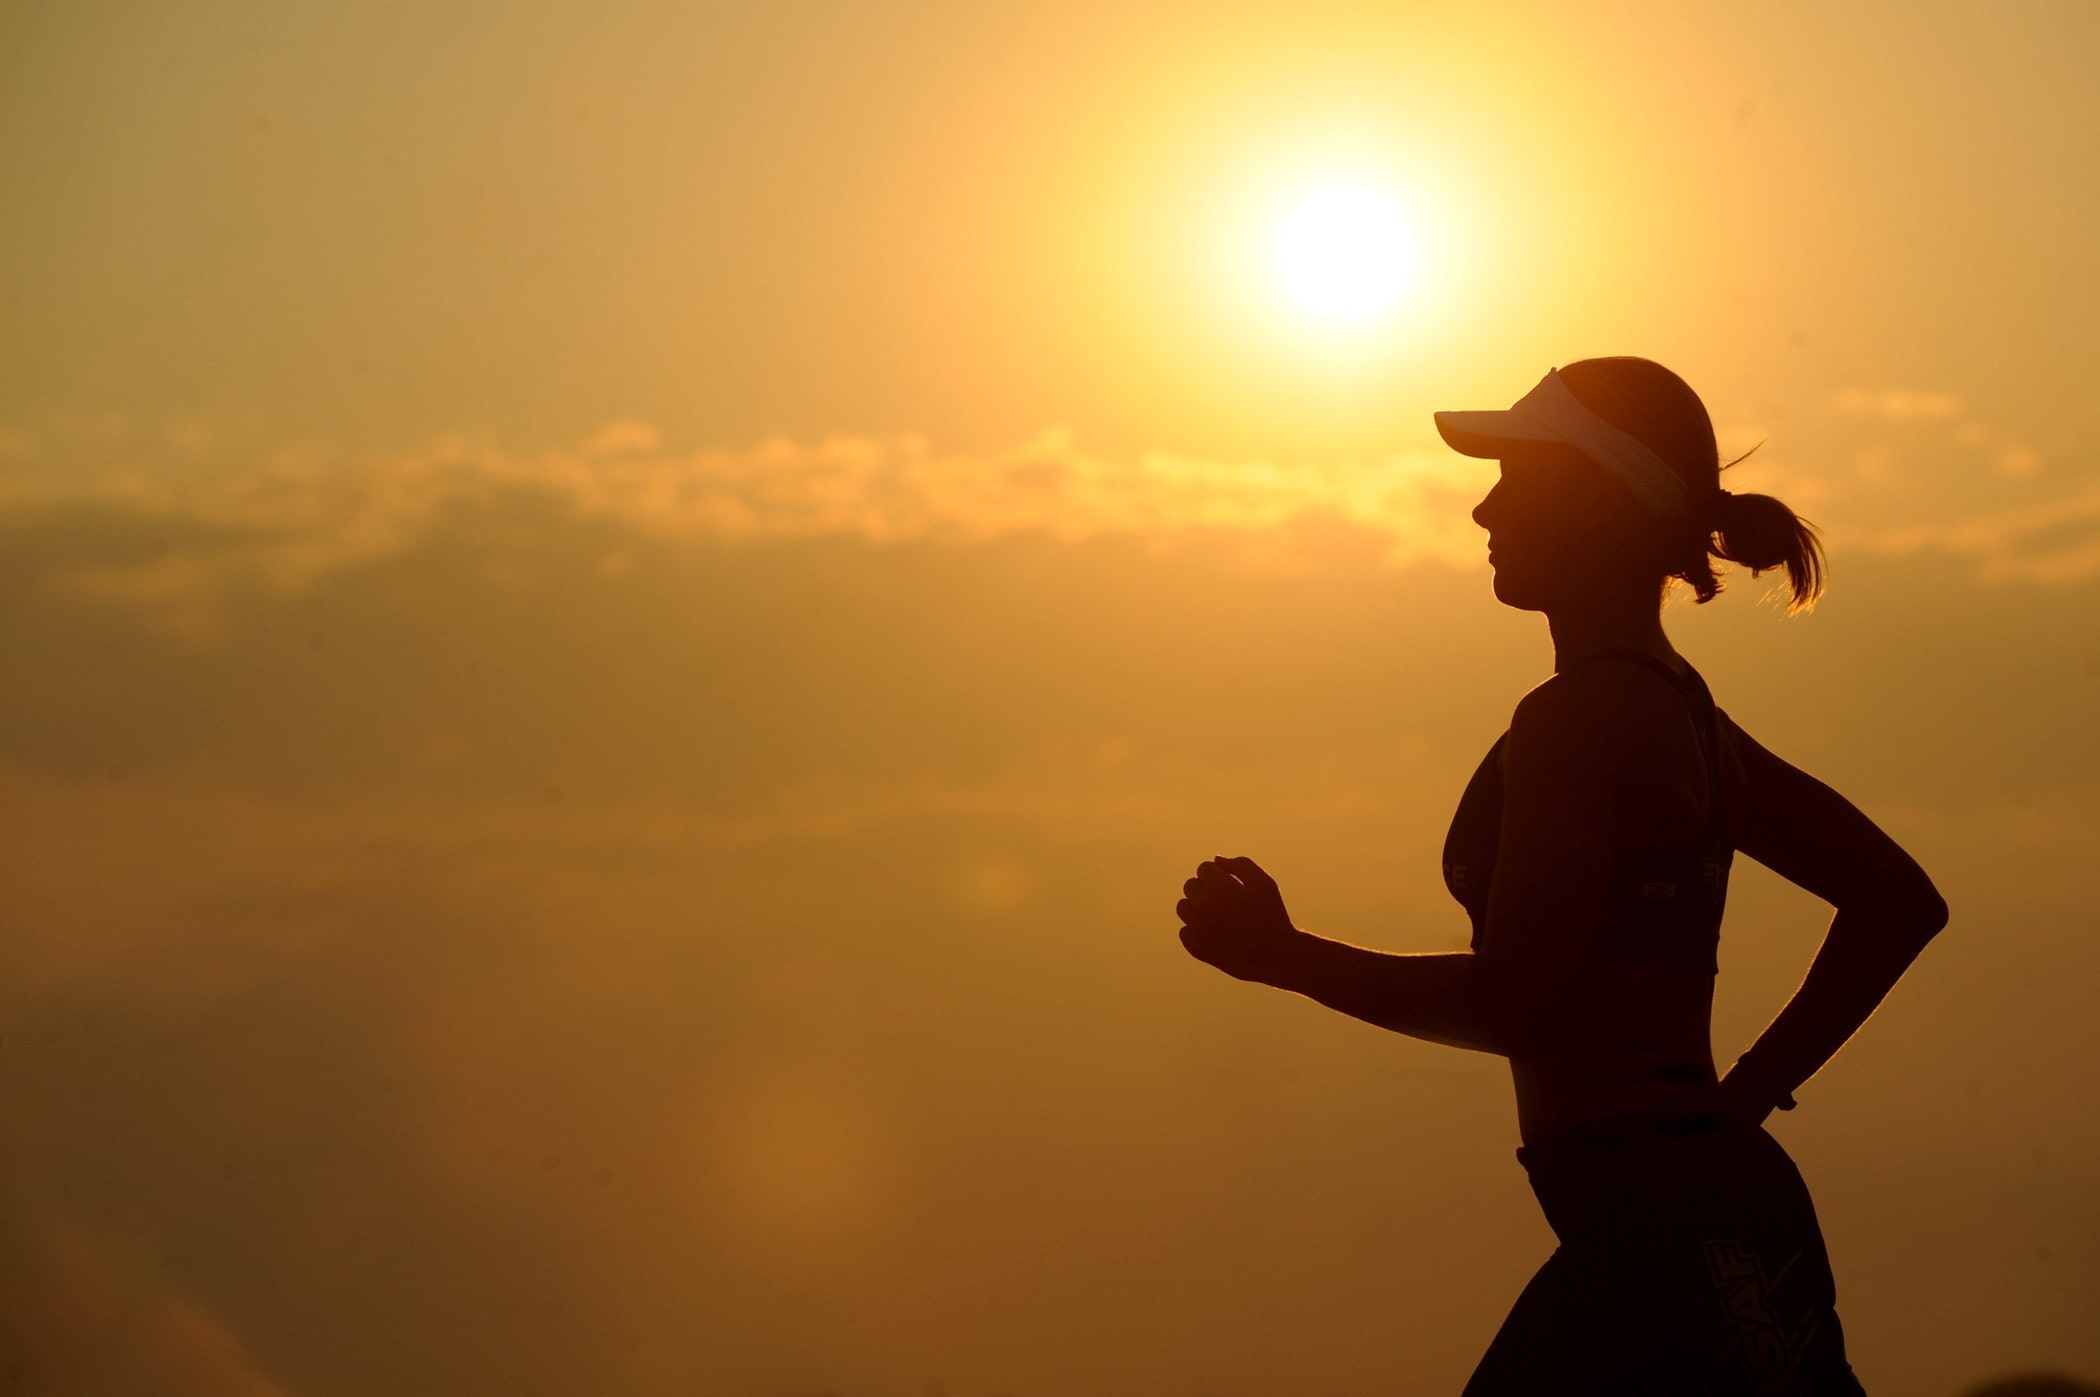 A women runs with the sunset in the background